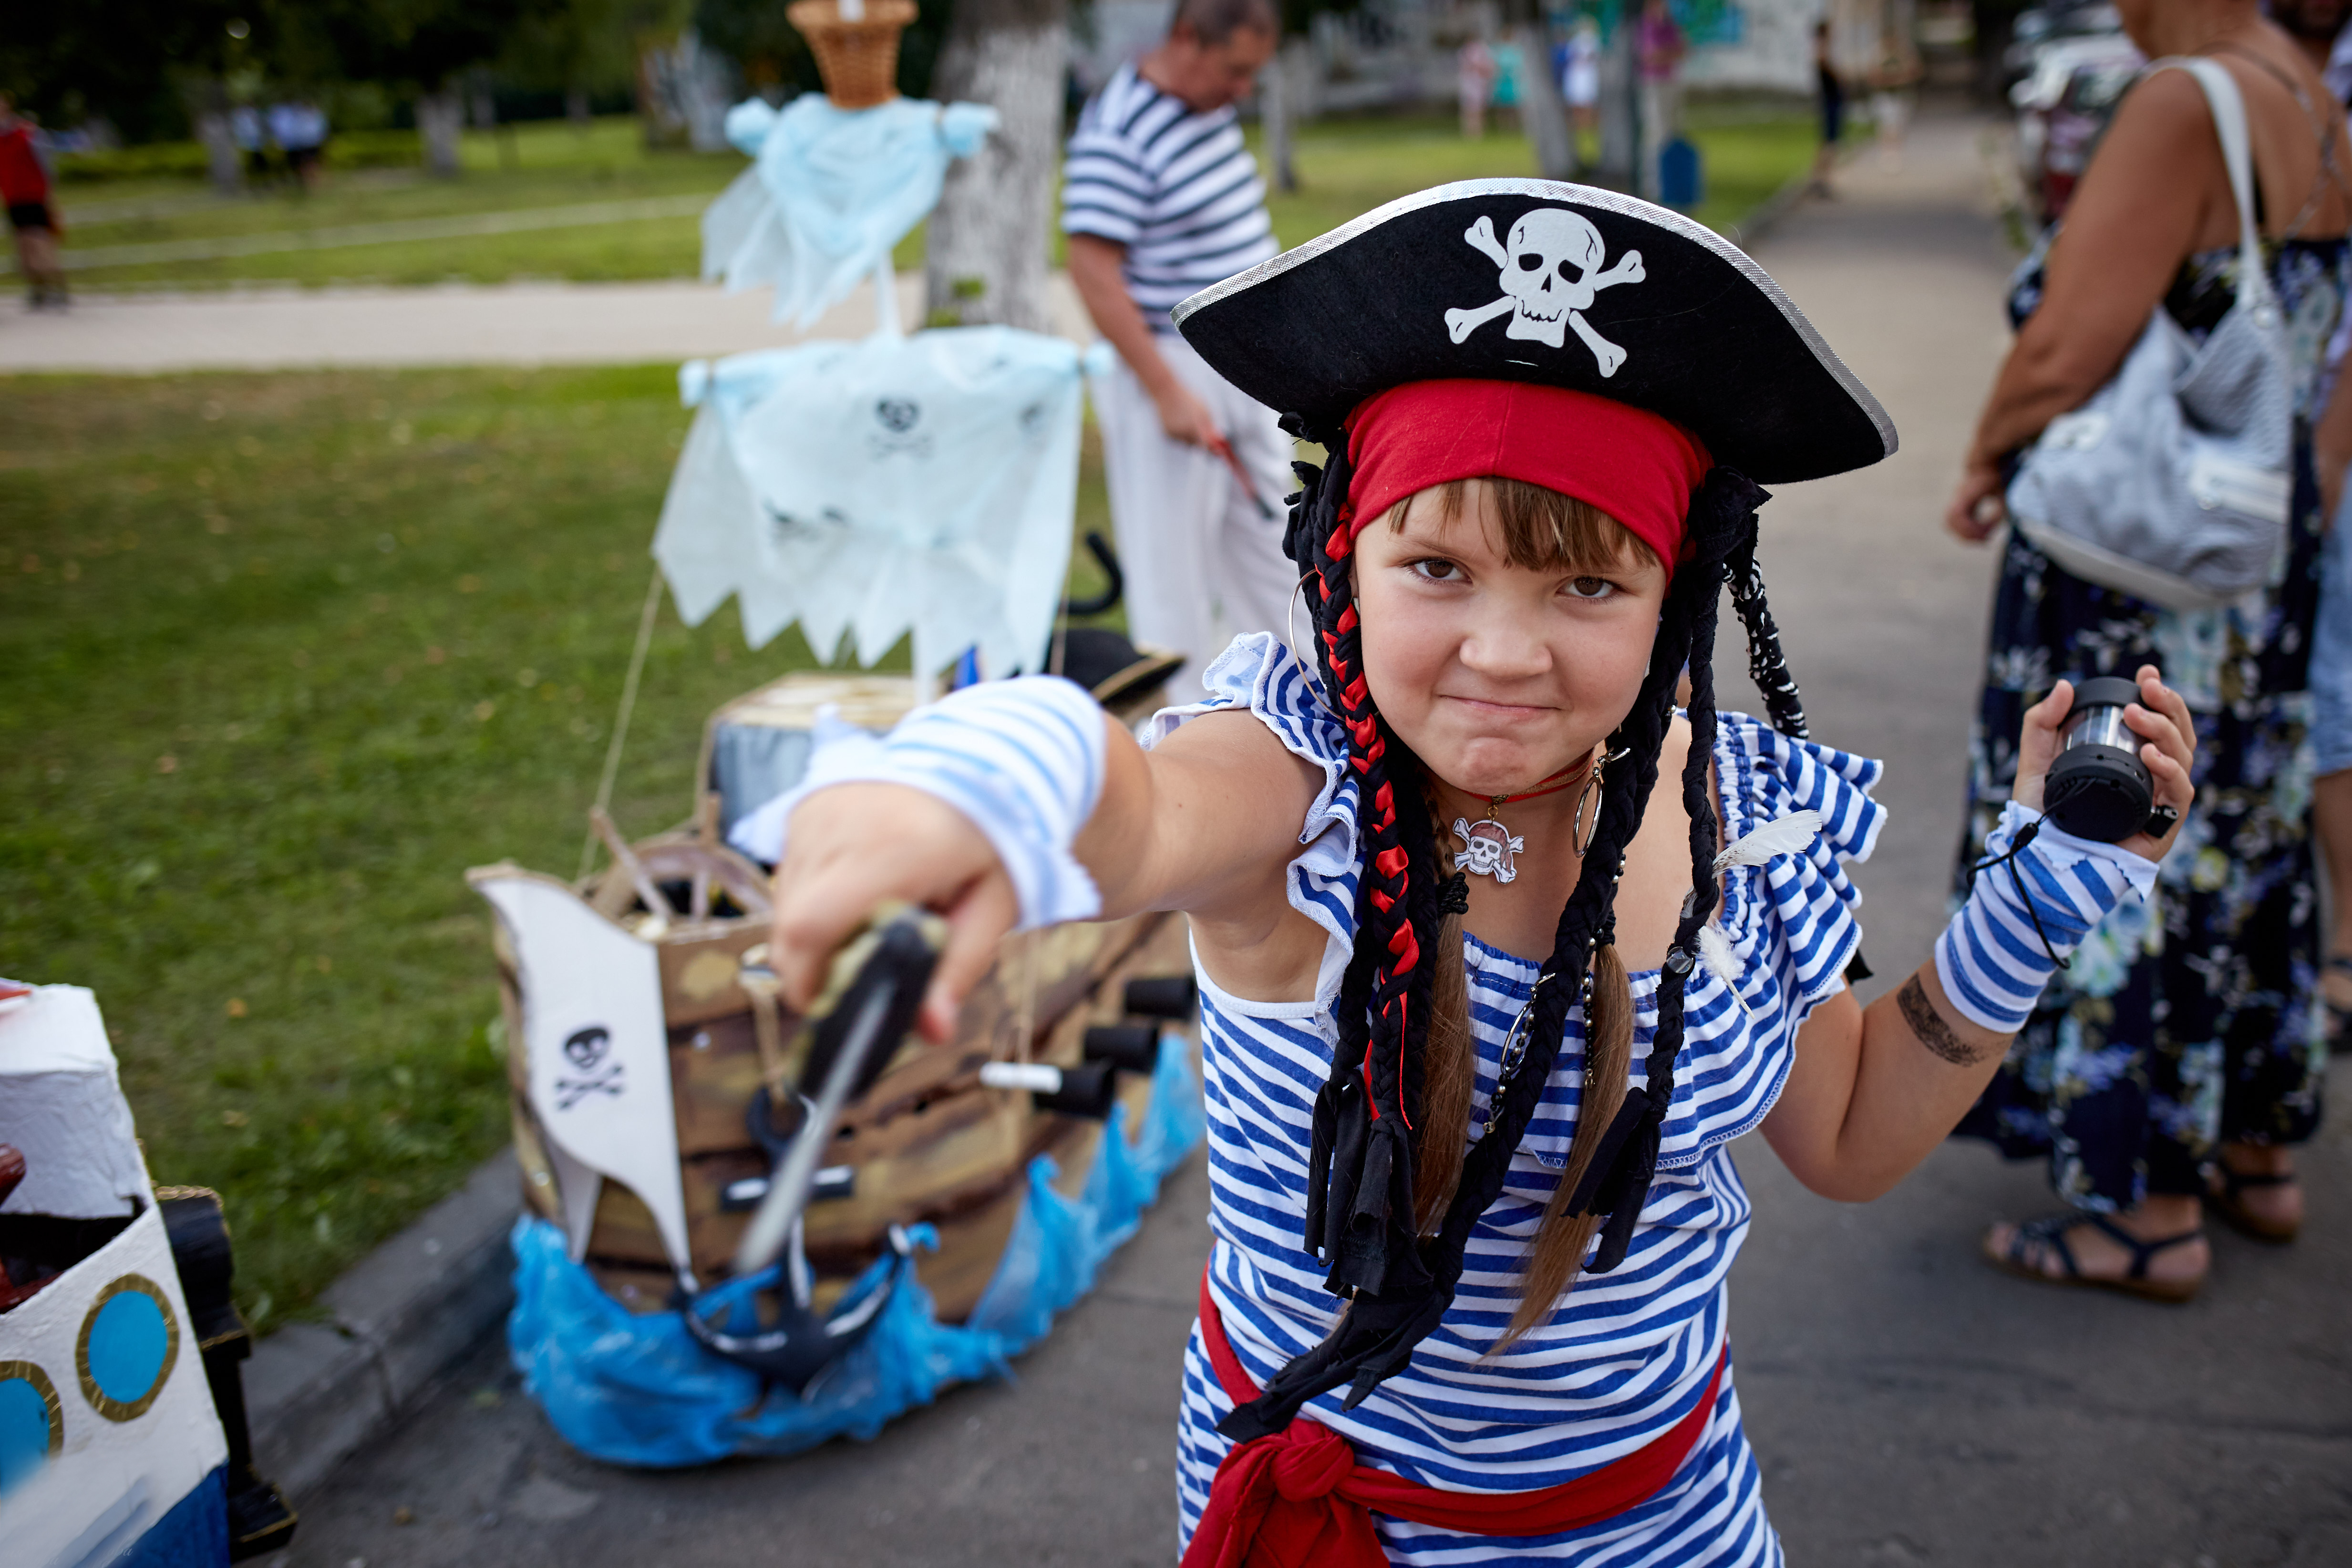 A child dressed as a pirate